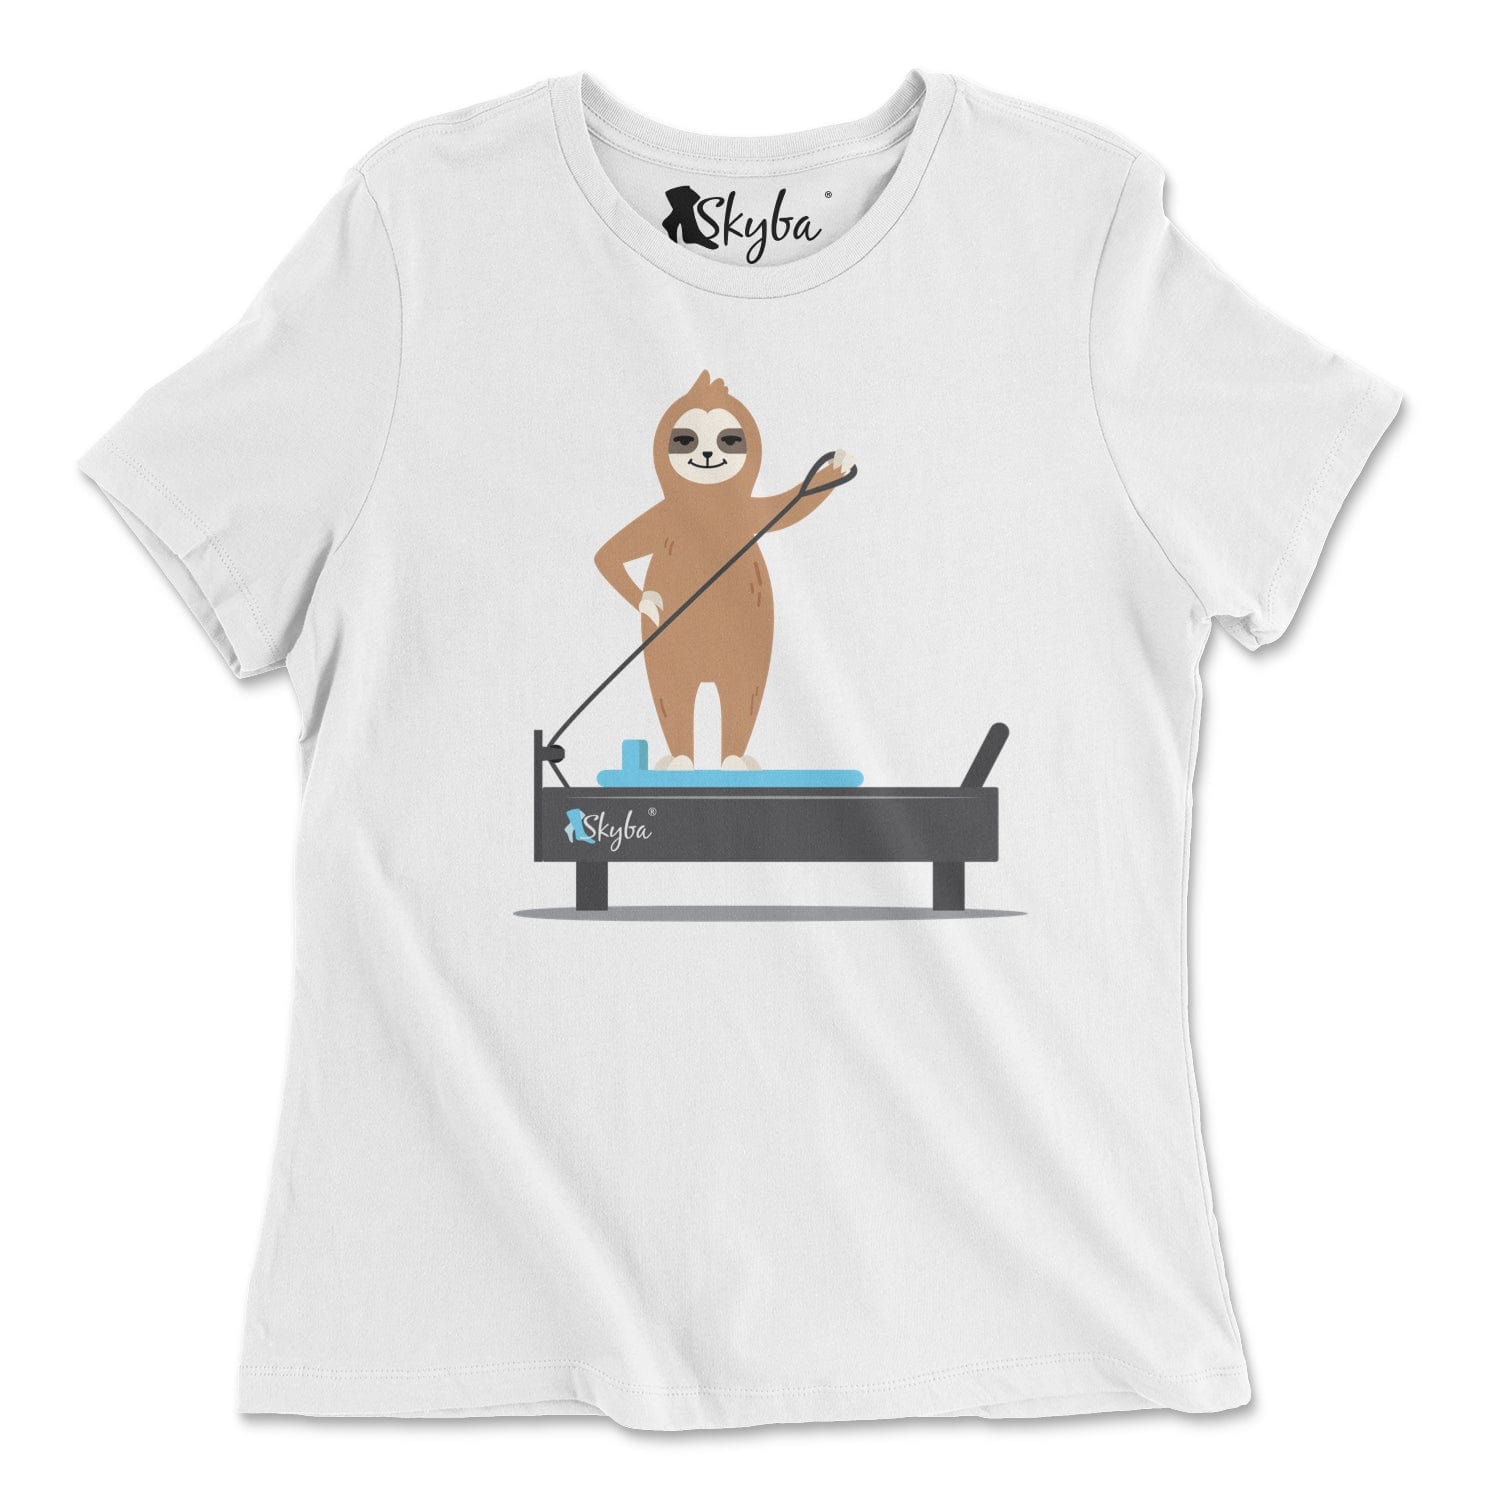 Sloth on the Reformer - Classic Tee Skyba T-Shirt